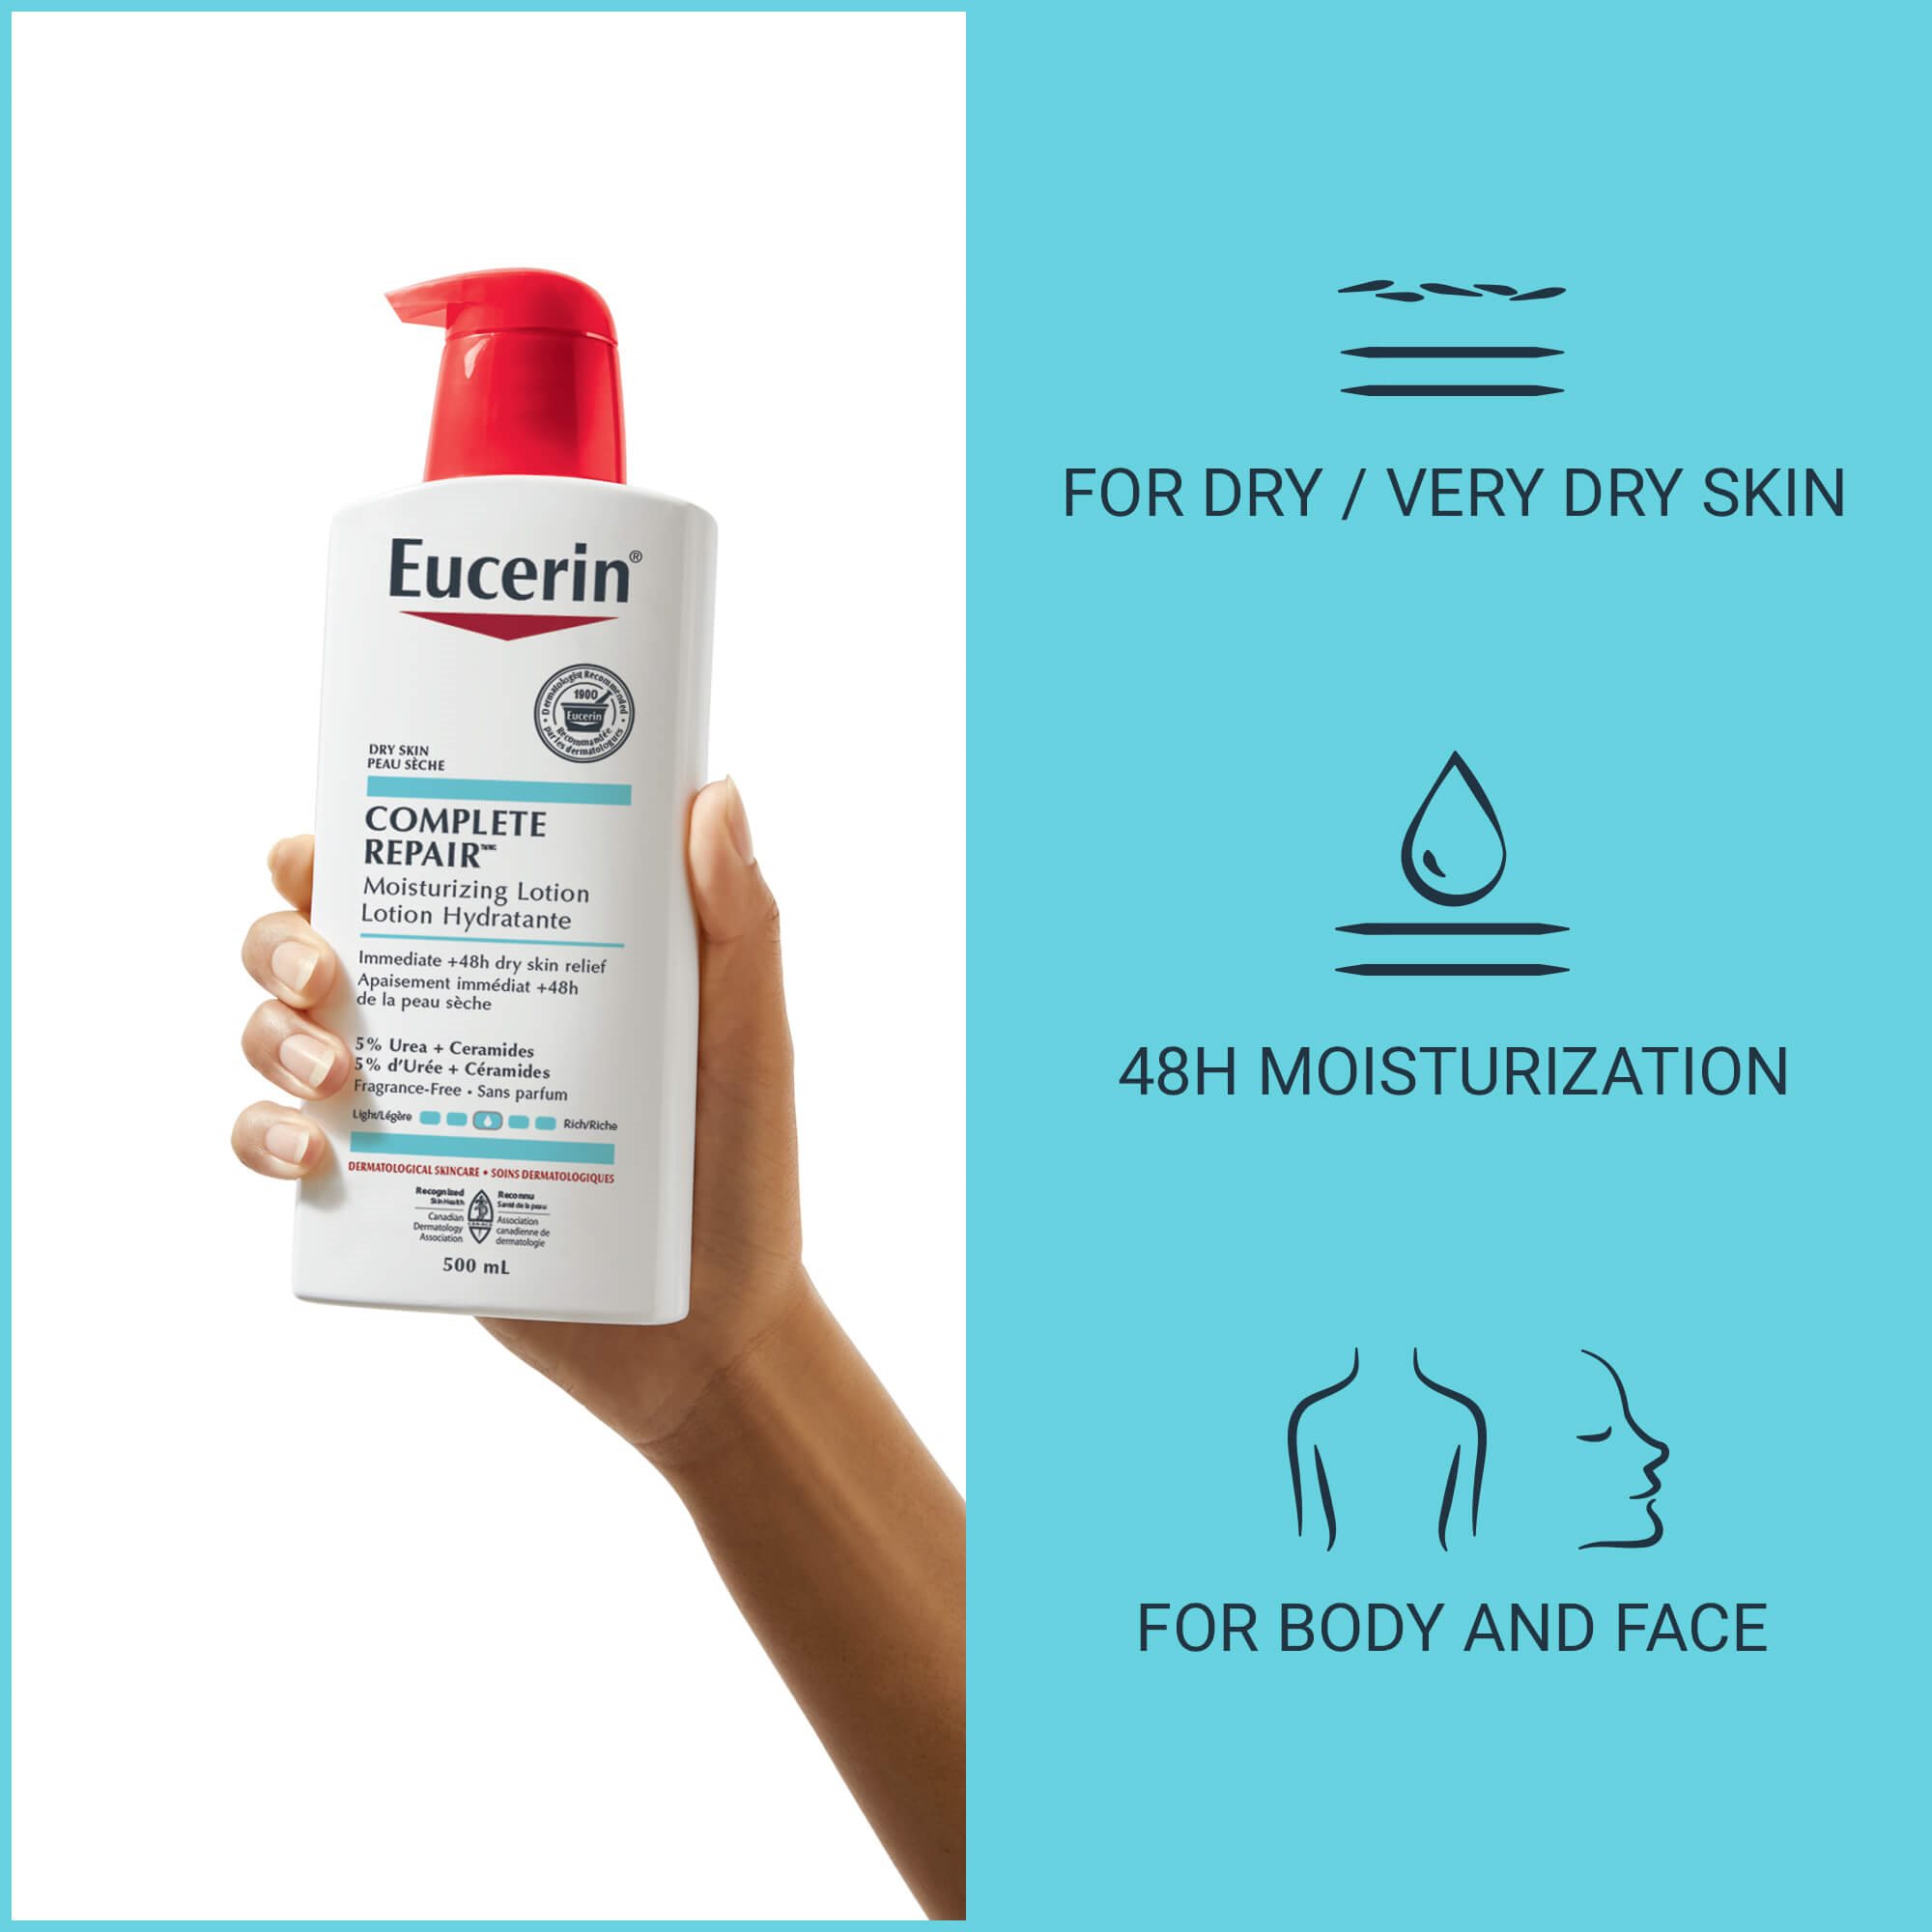 Close up view of 500mL Eucerin Complete Repair moisturizing lotion being held by hand.